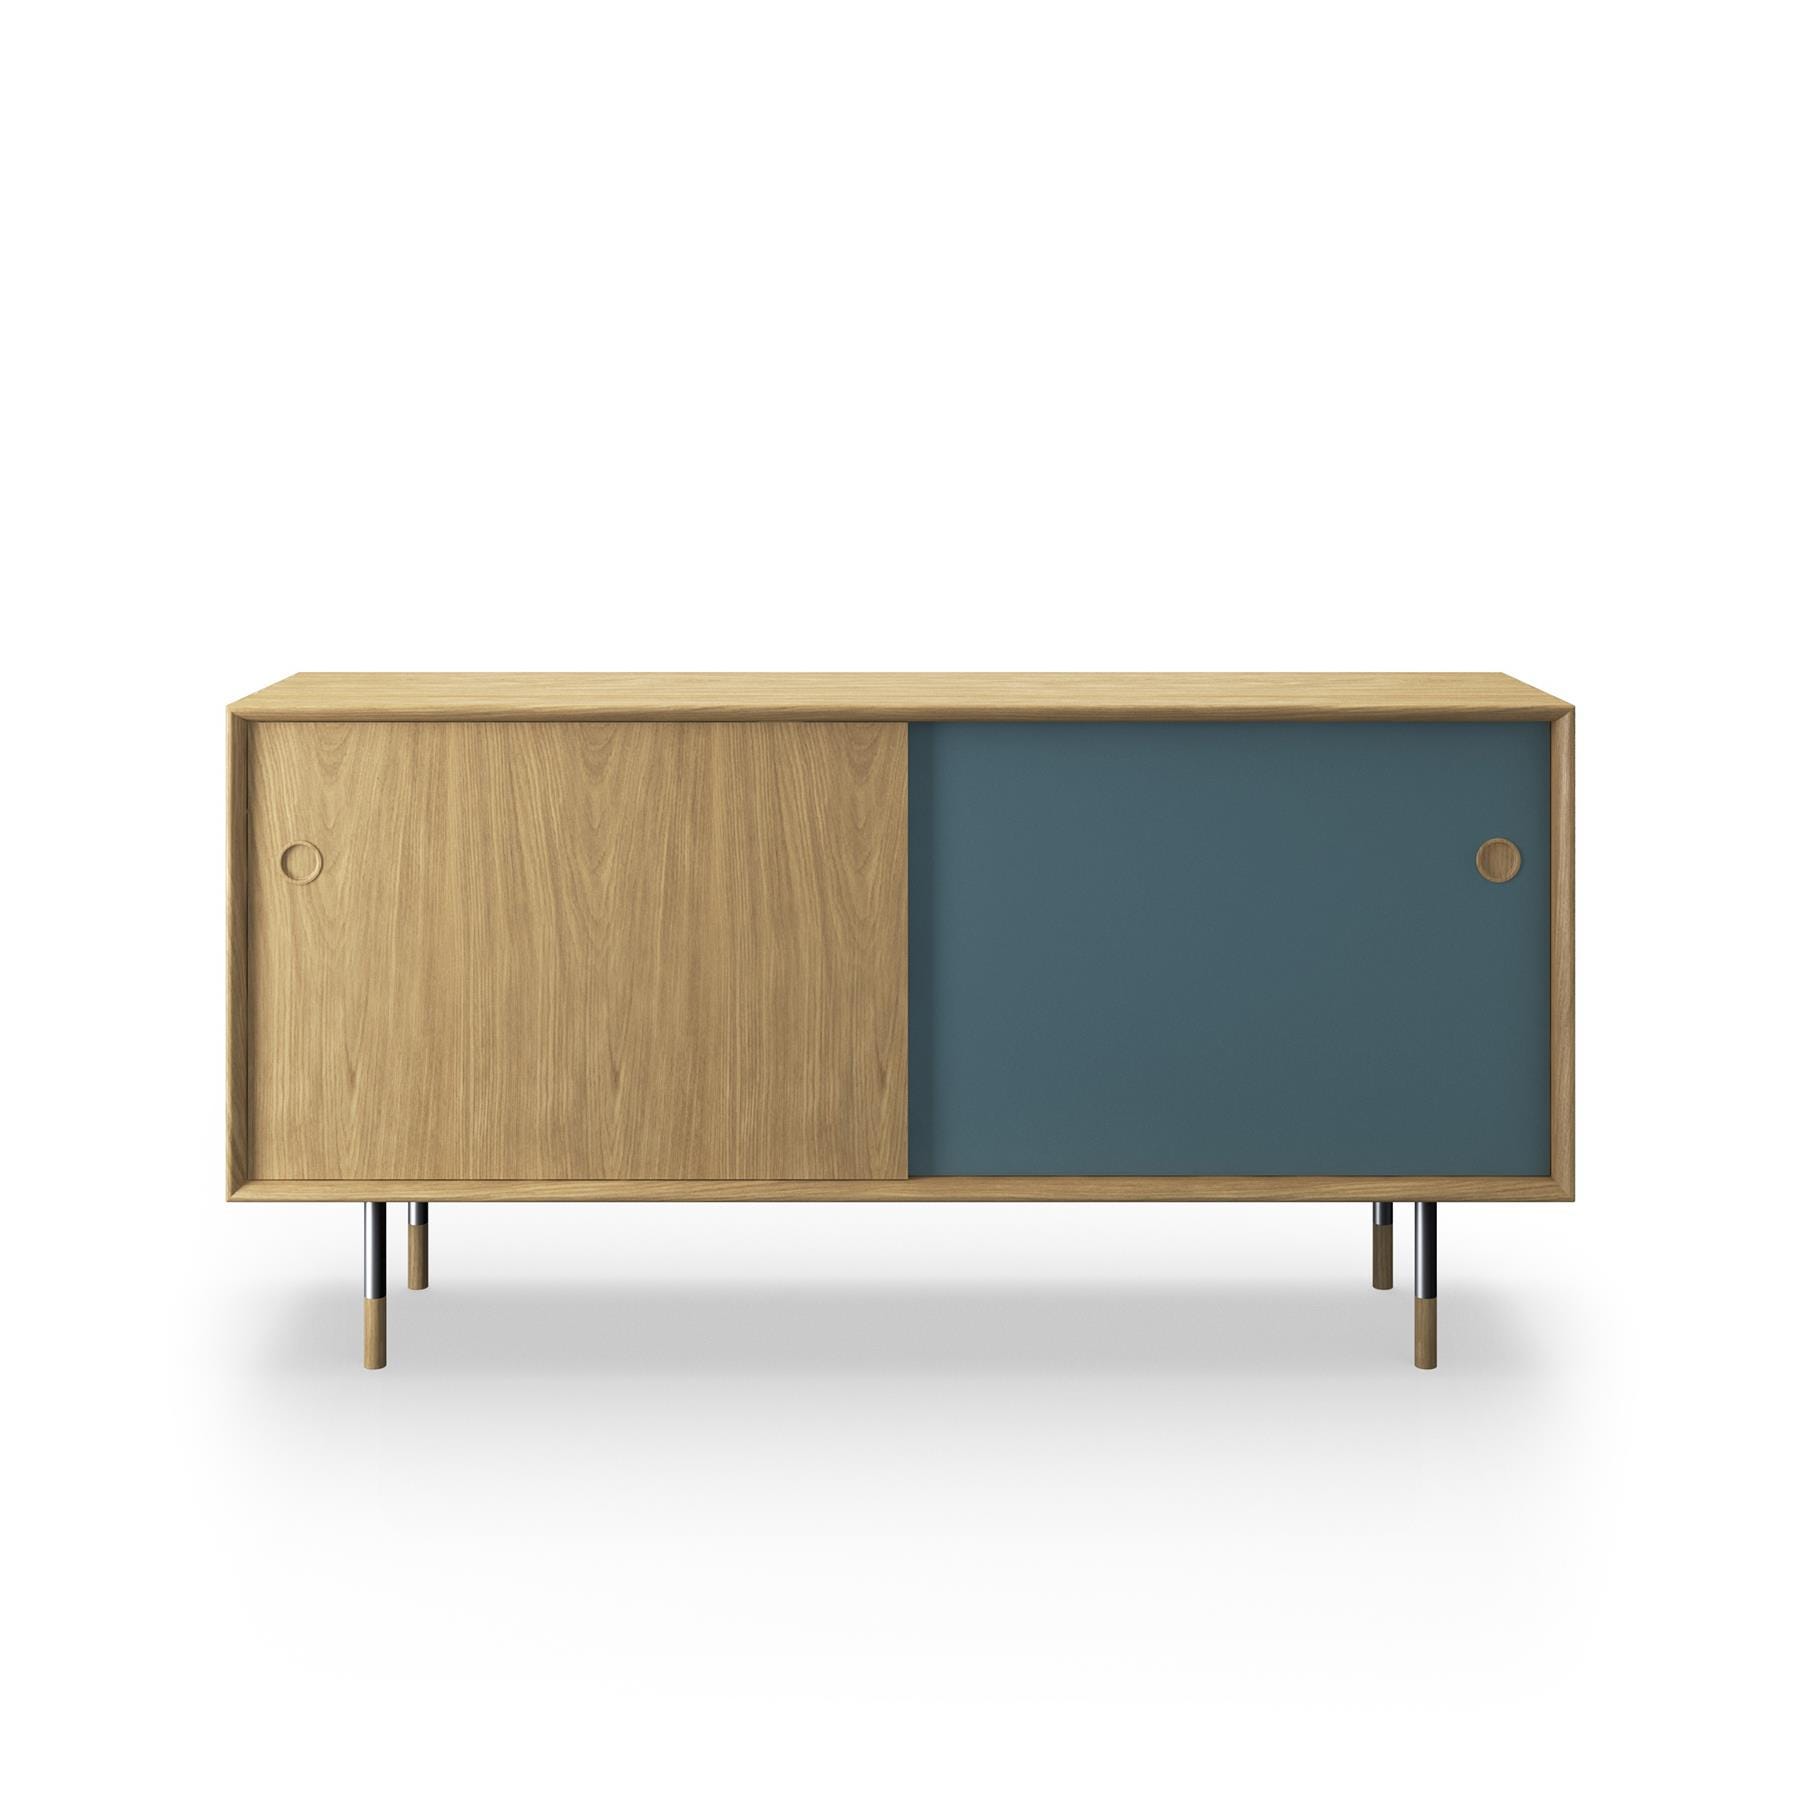 Sibast No 11 Sideboard White Oiled Oak Blue And Natural Front Metal Legs Light Wood Designer Furniture From Holloways Of Ludlow